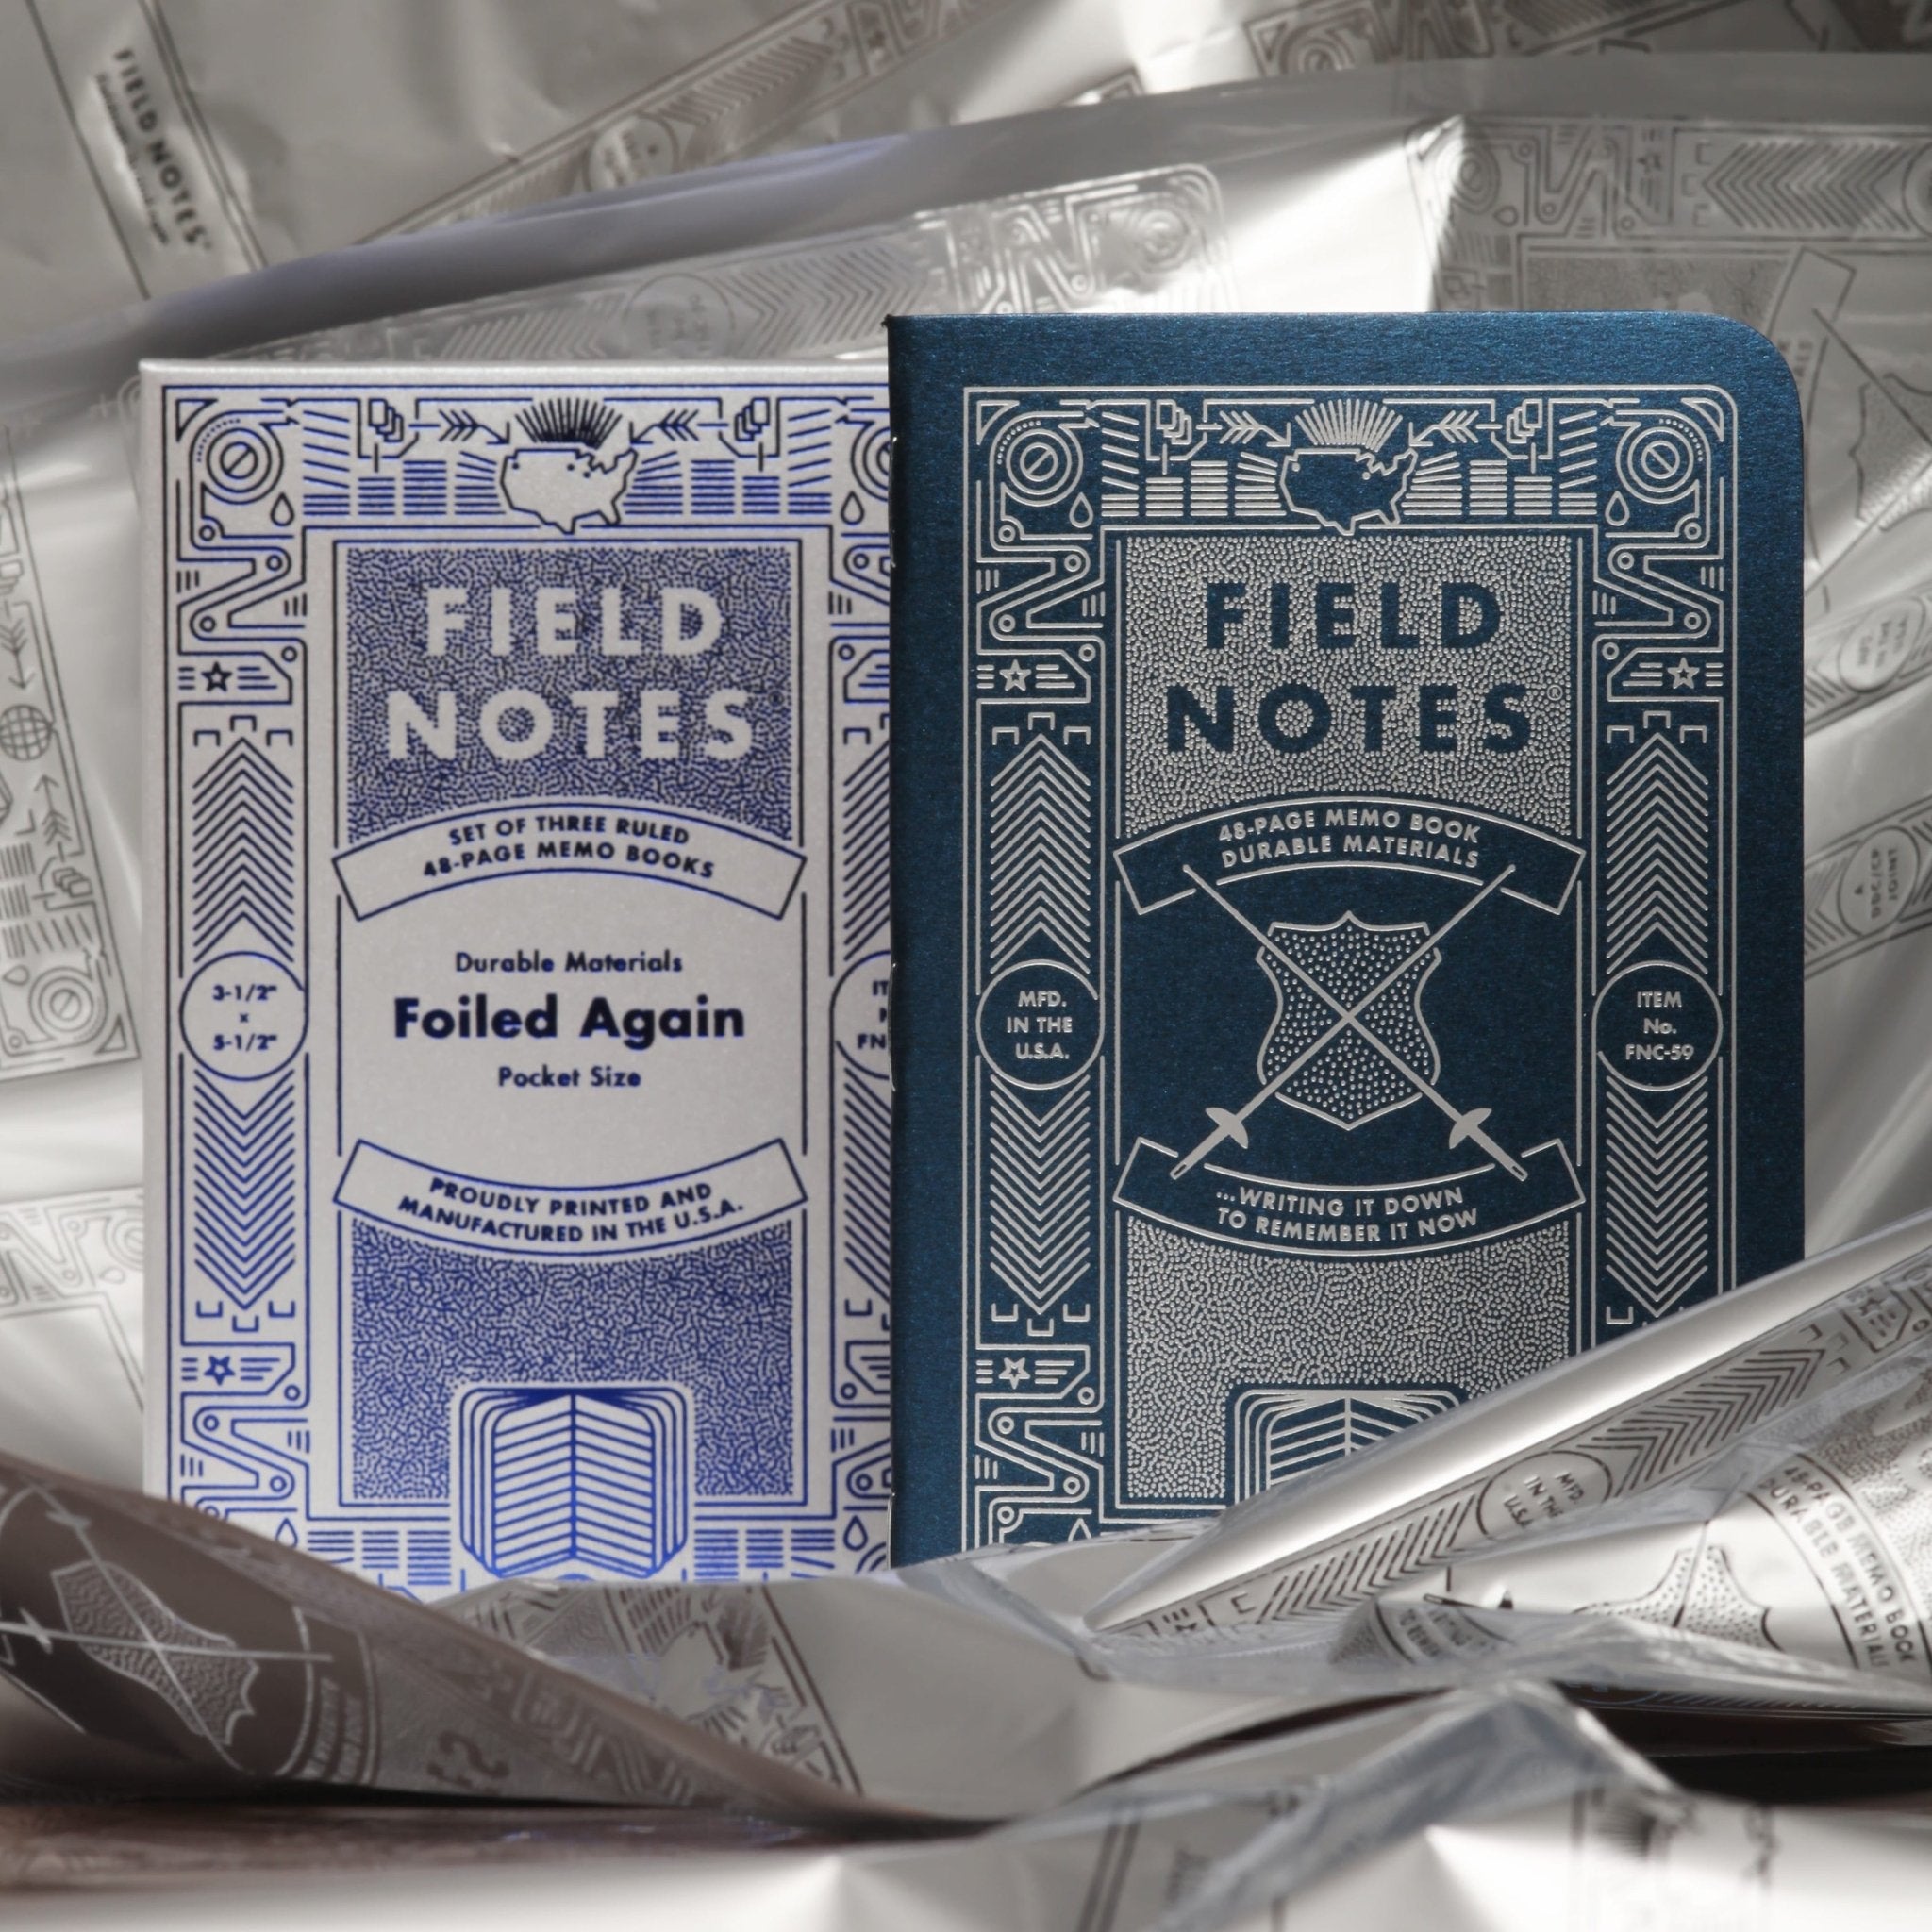 Field Notes: Foiled Again